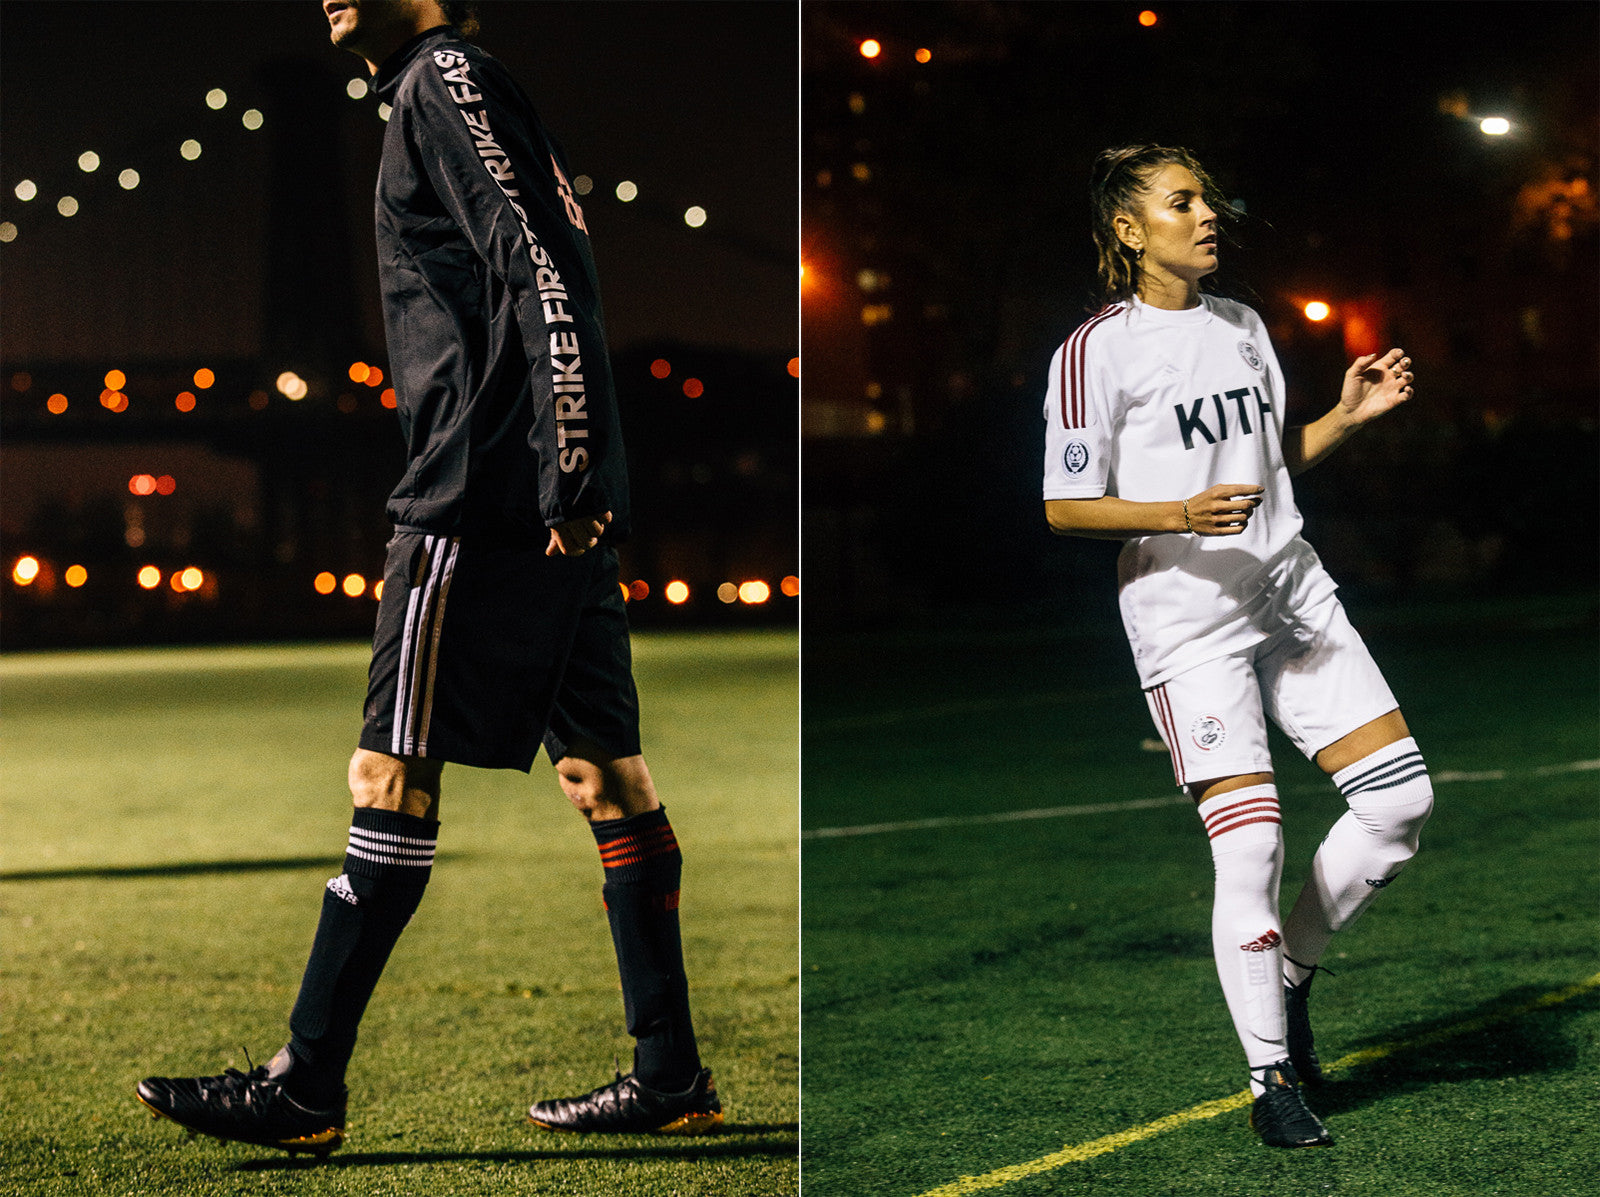 kith x adidas soccer game jersey